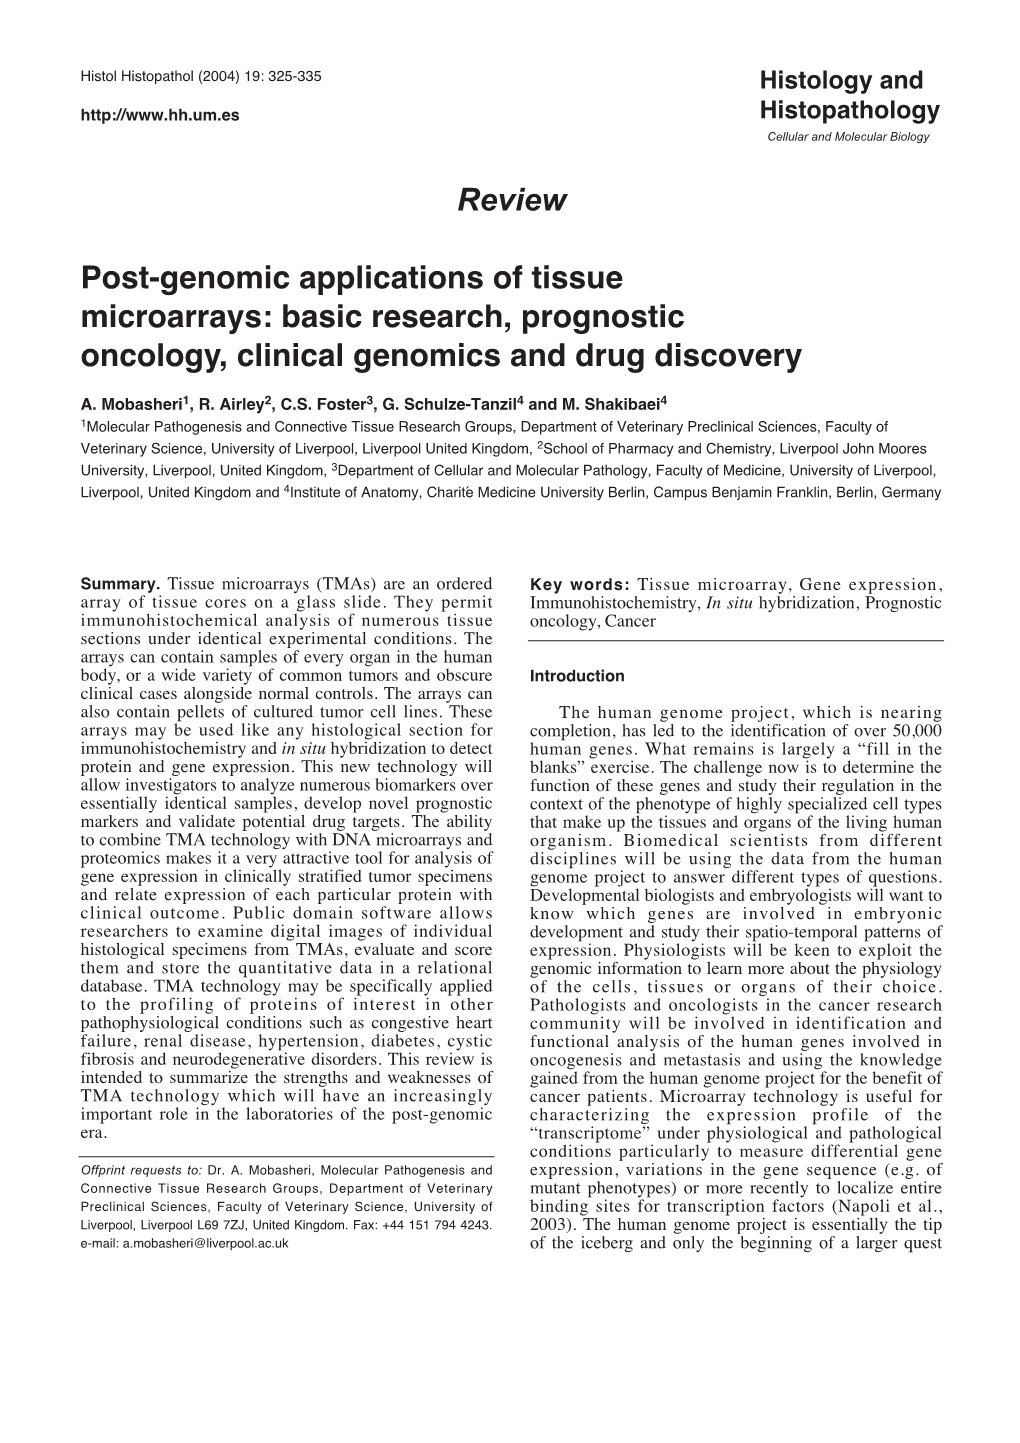 Review Post-Genomic Applications of Tissue Microarrays